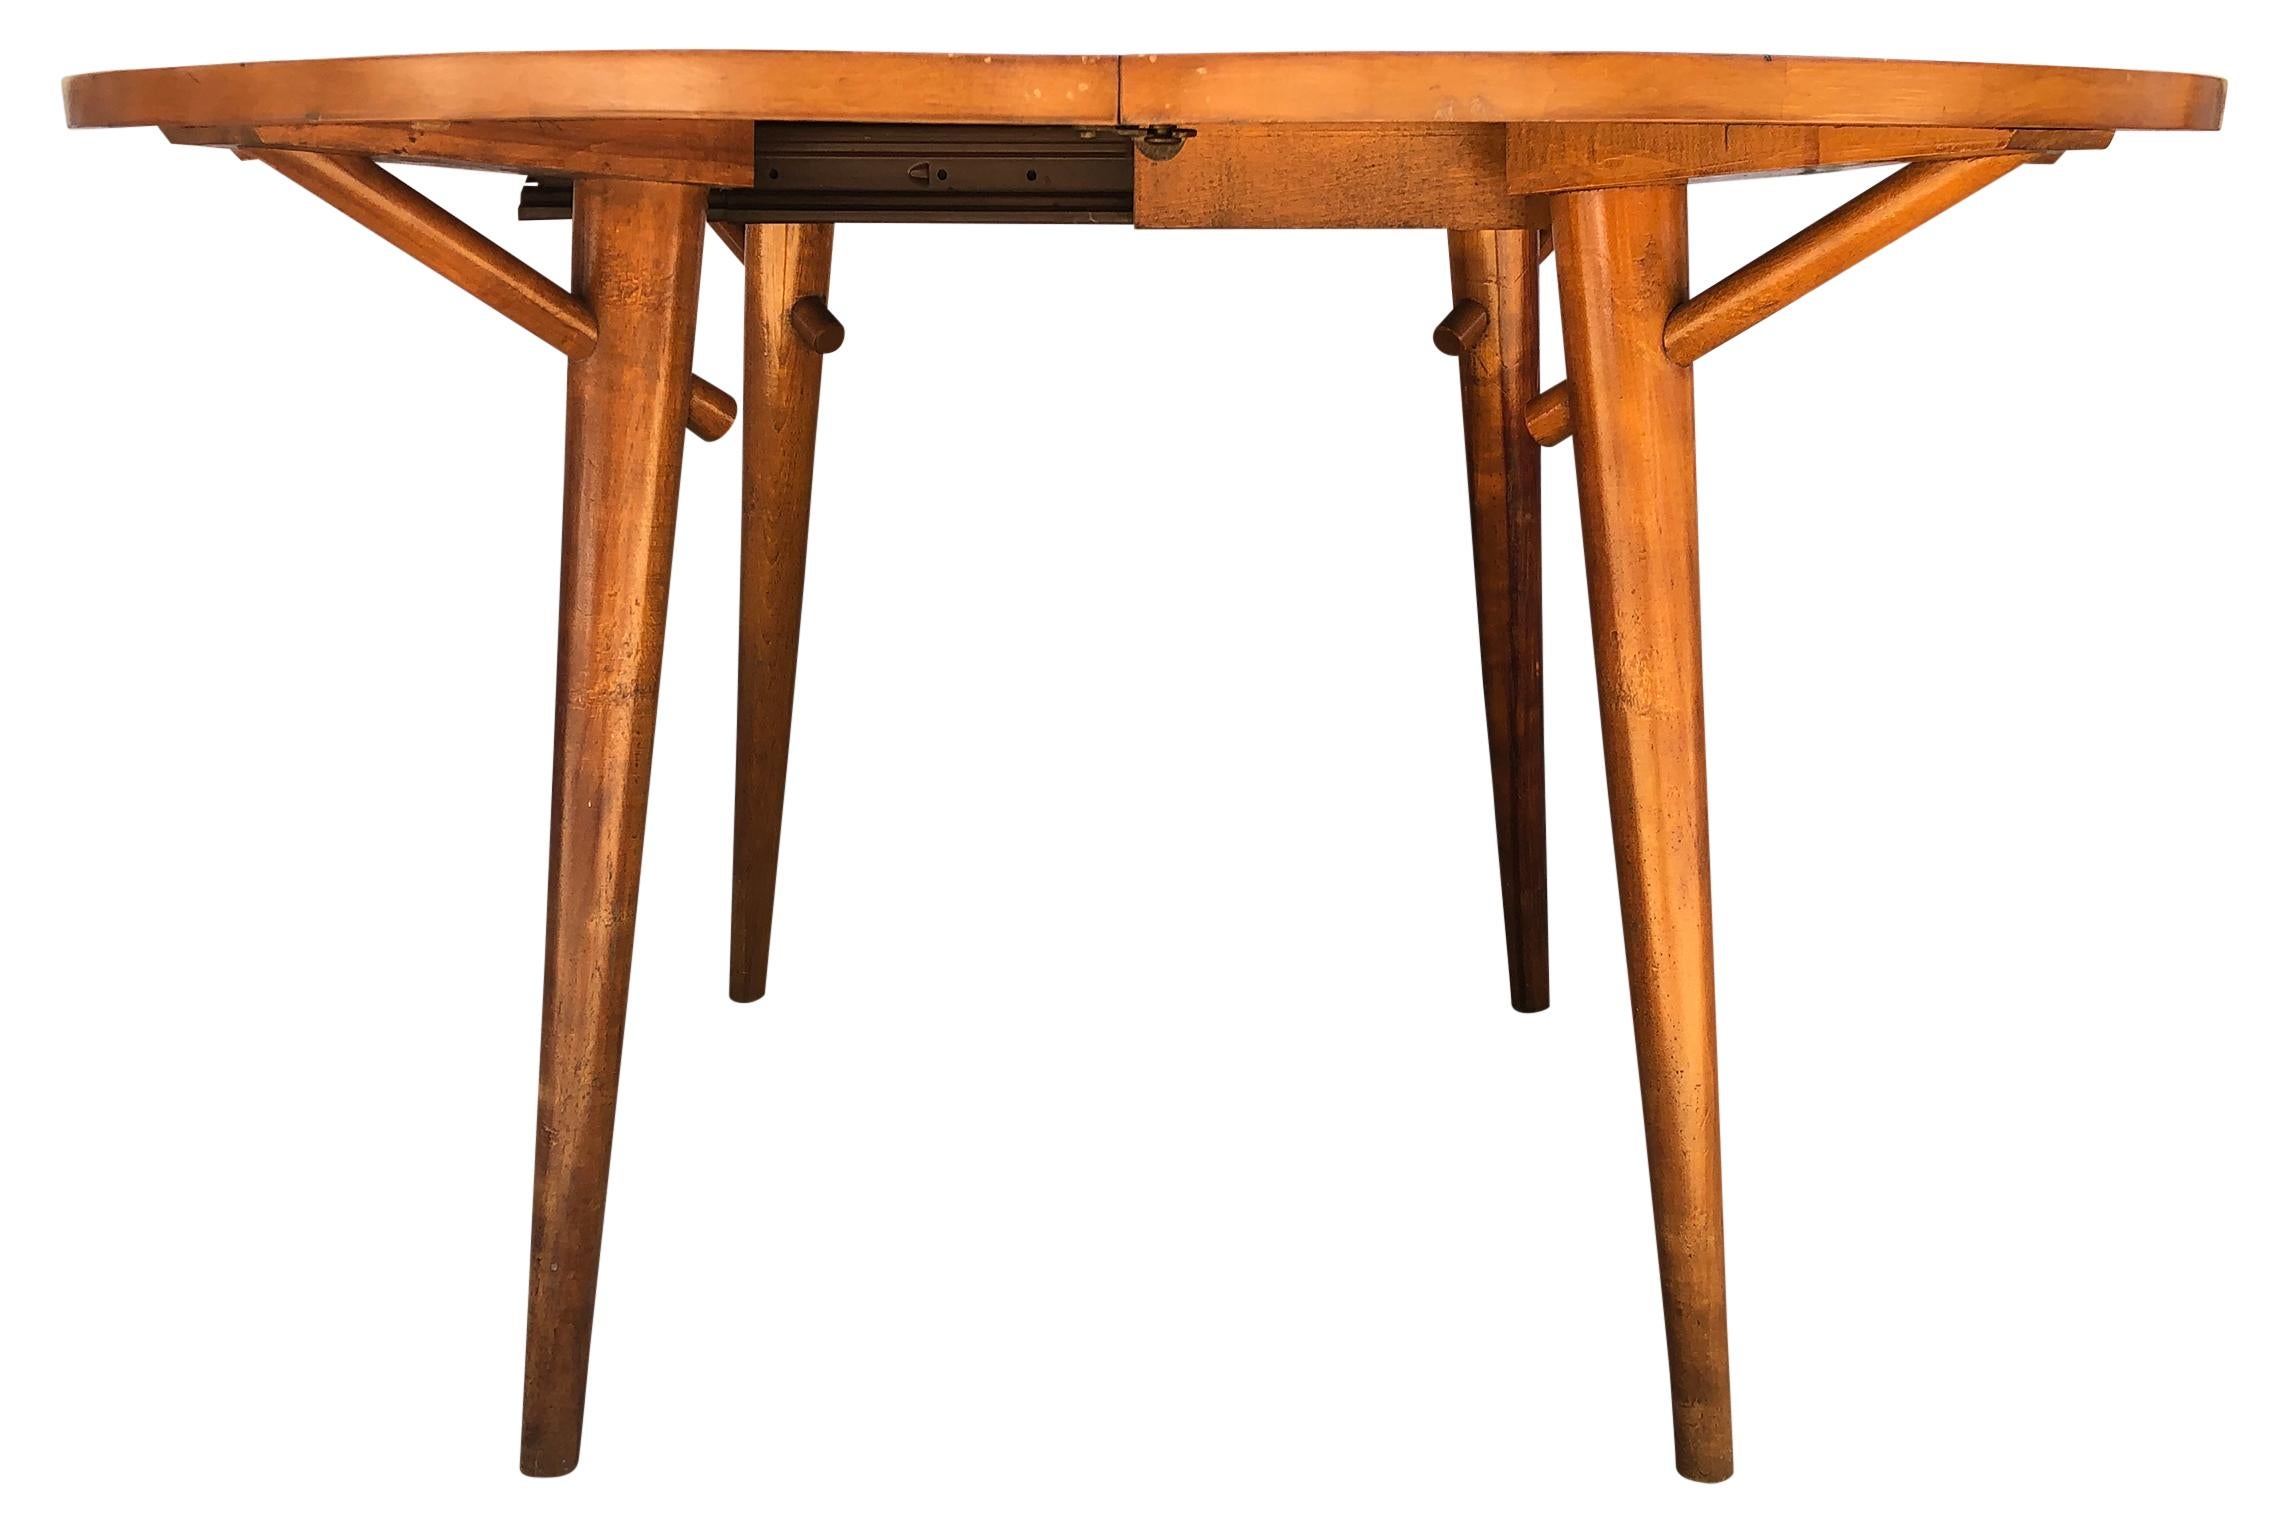 Beautiful early 1950s round rare Leslie Diamond maple dining table with 2 leaves by Conant Ball, great midcentury design. Very sturdy designed dining table #6008 with tapered legs. Solid maple table with a blonde stain. (2) Original table leaves (1)